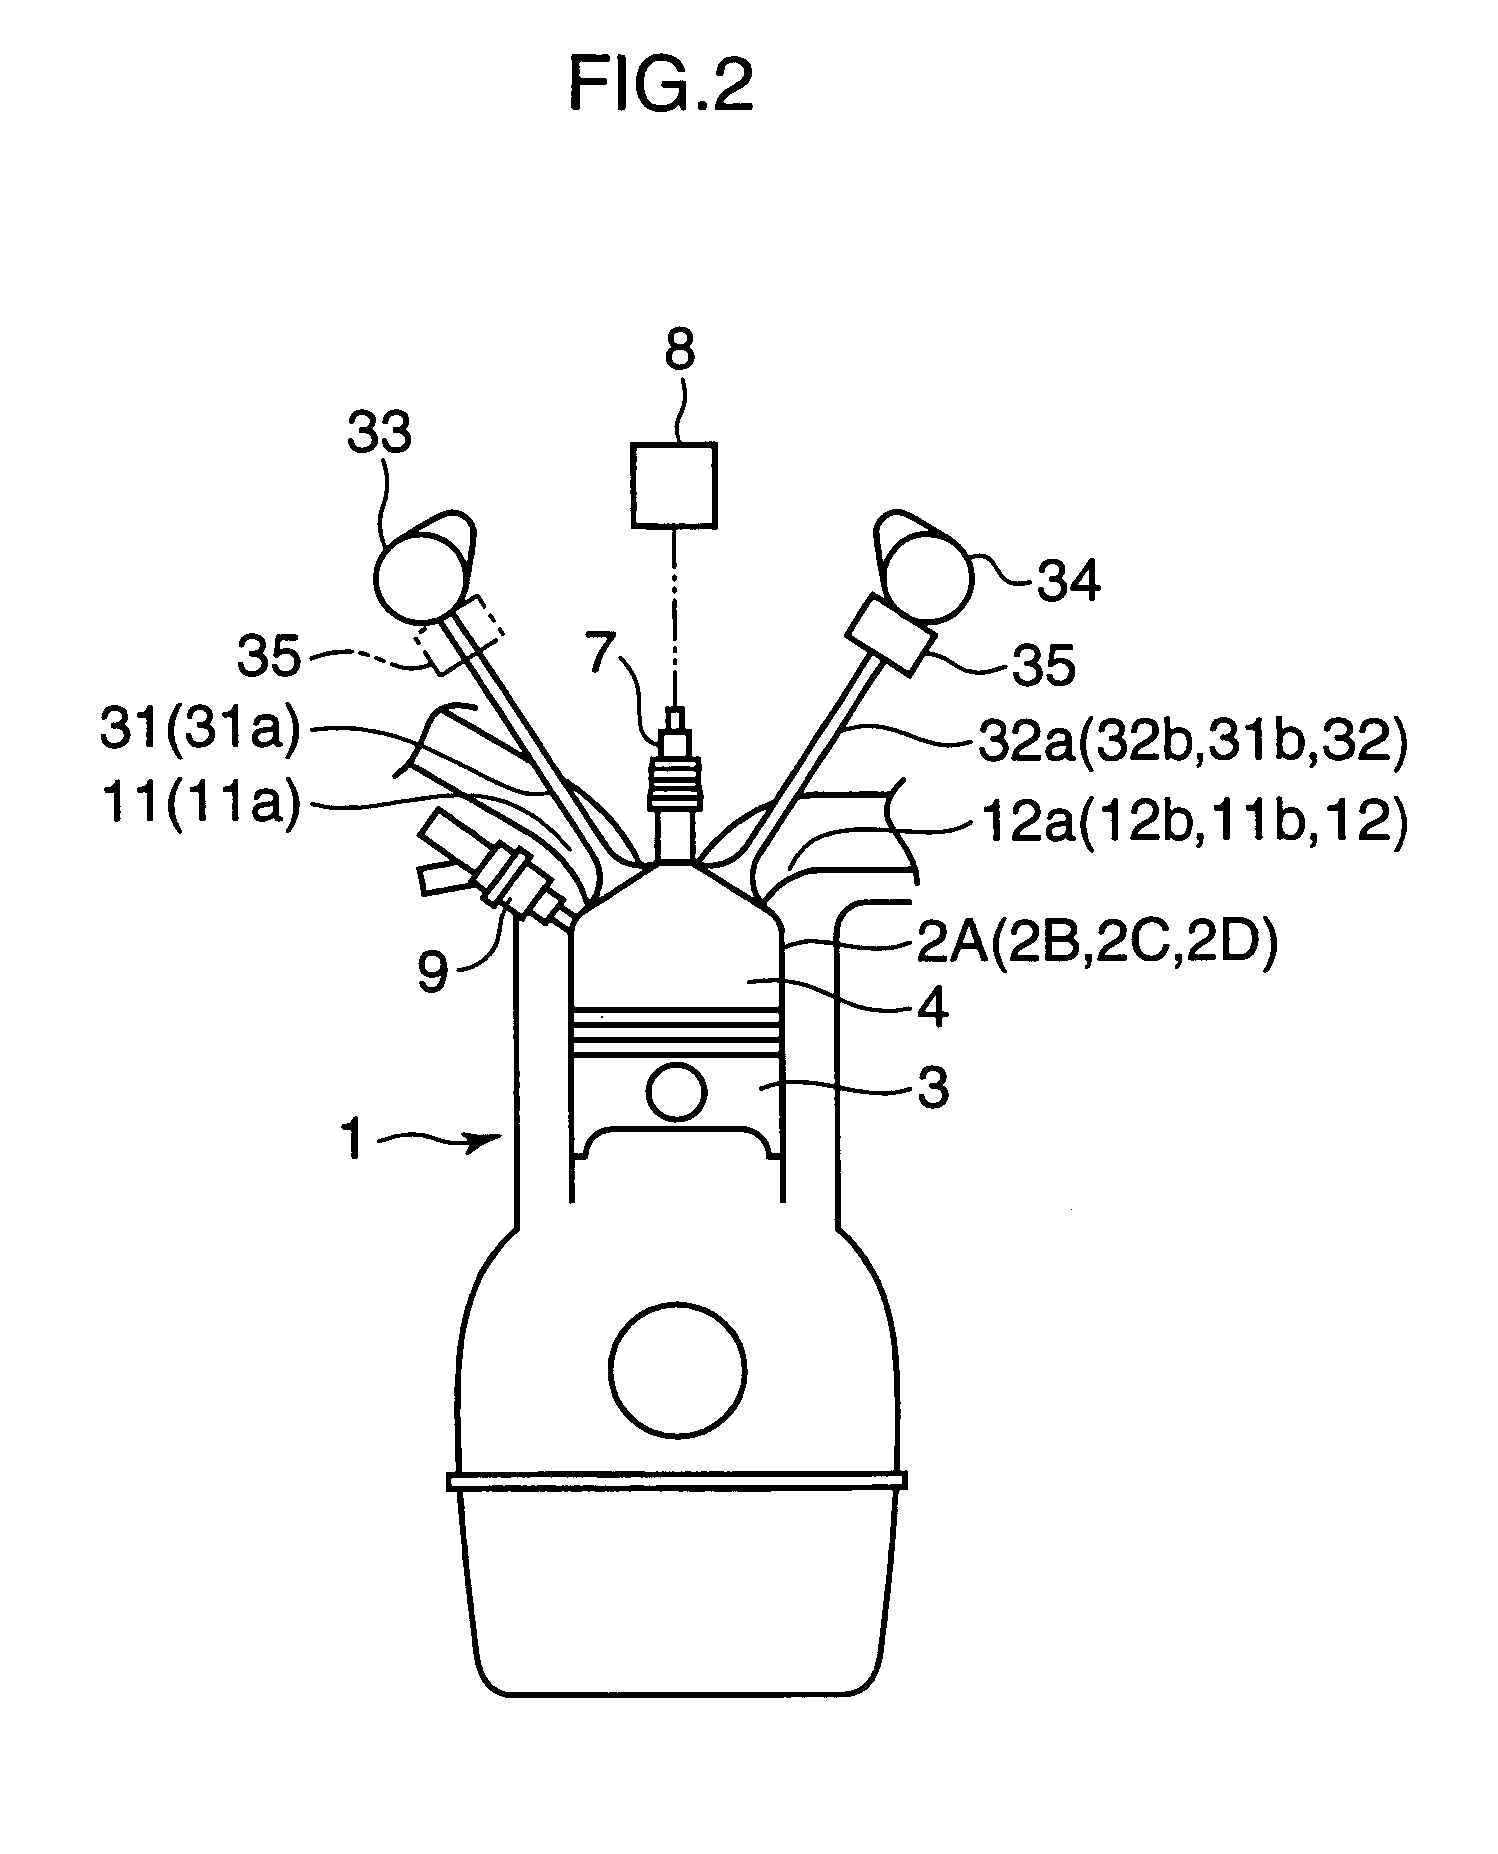 Spark ignition engine control device